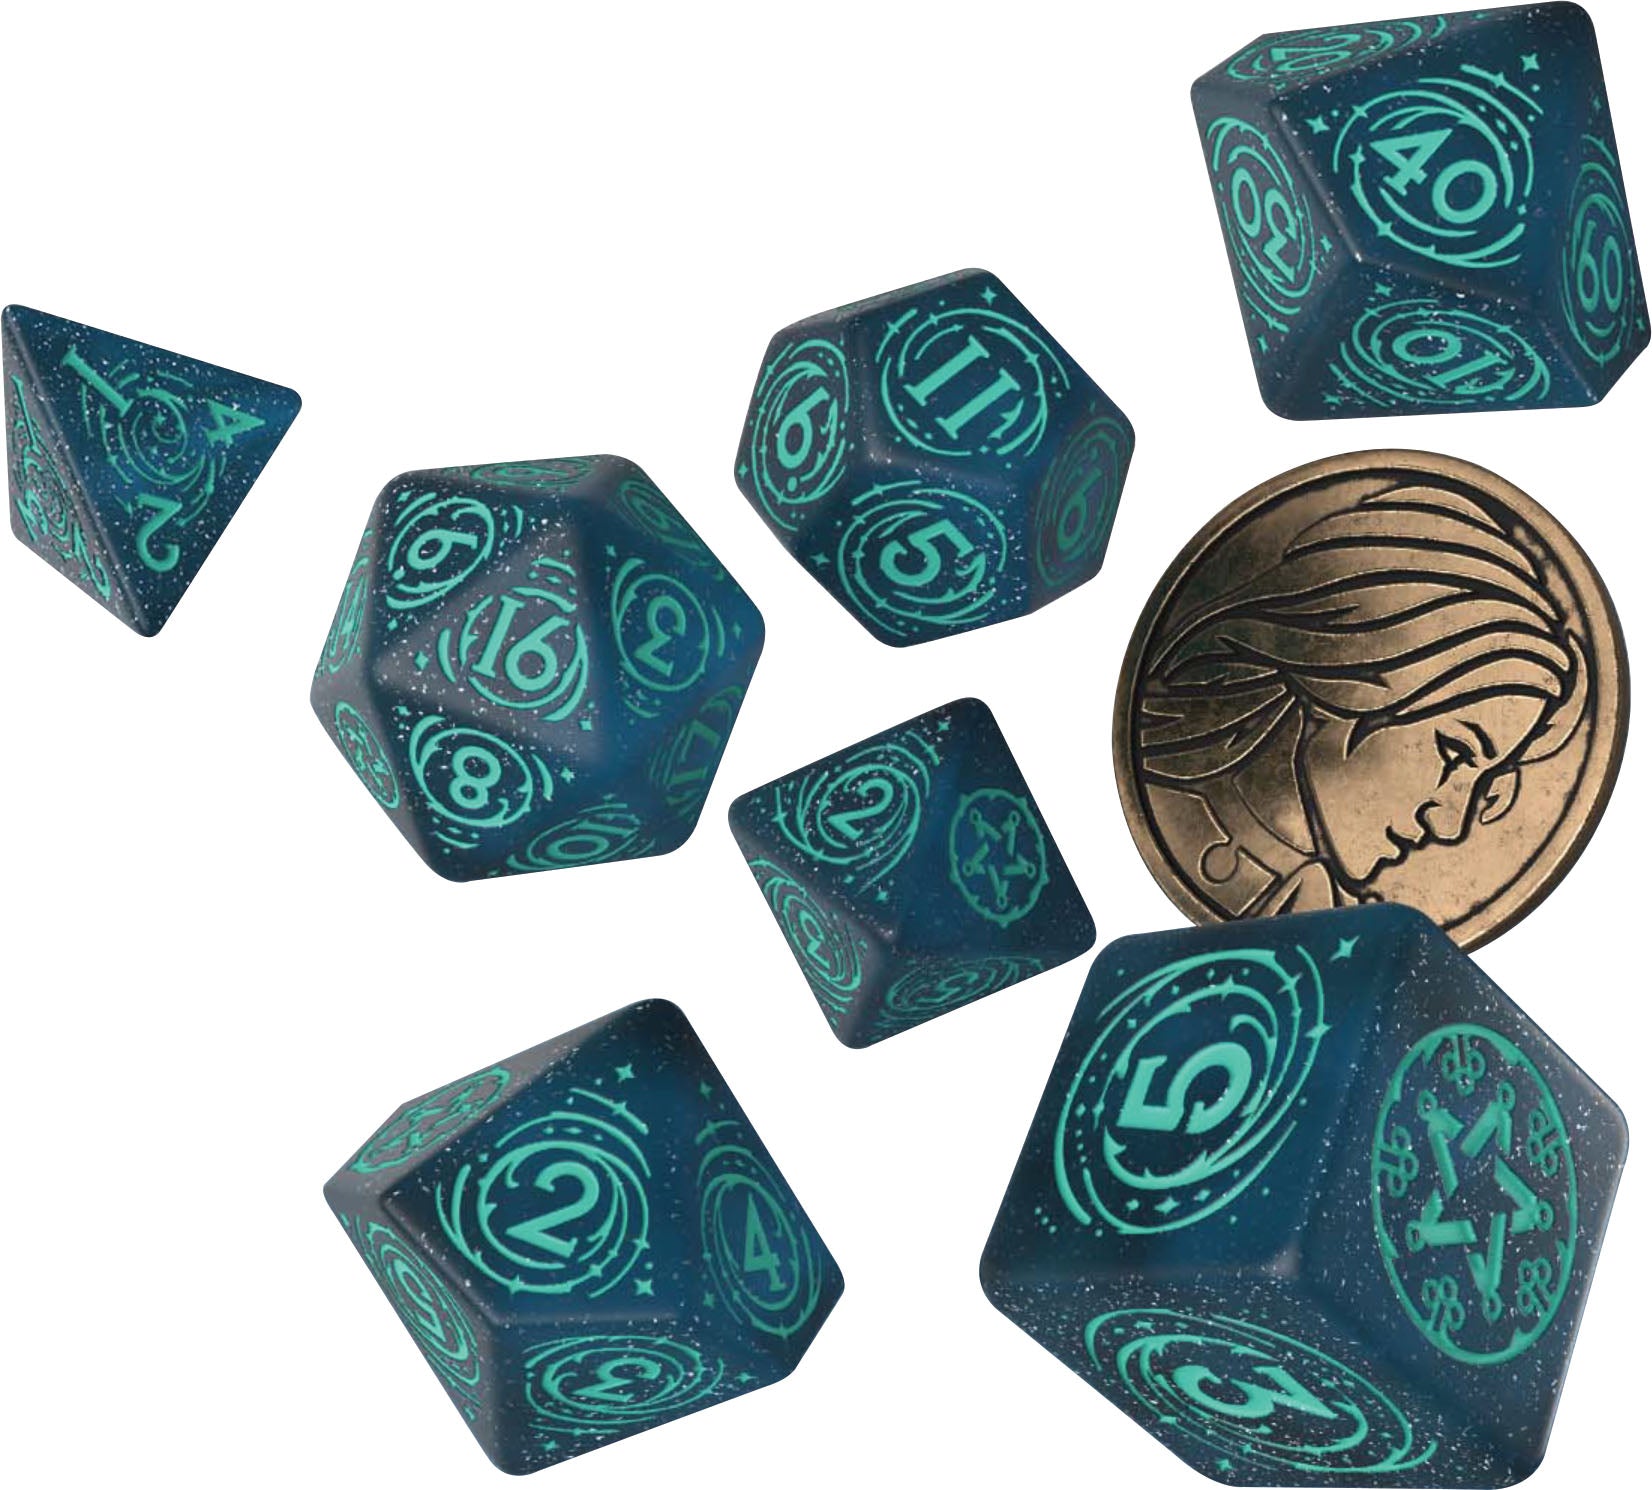 The Witcher Dice Set: Yennefer - Sorceress Supreme (7 + coin) - Bards & Cards